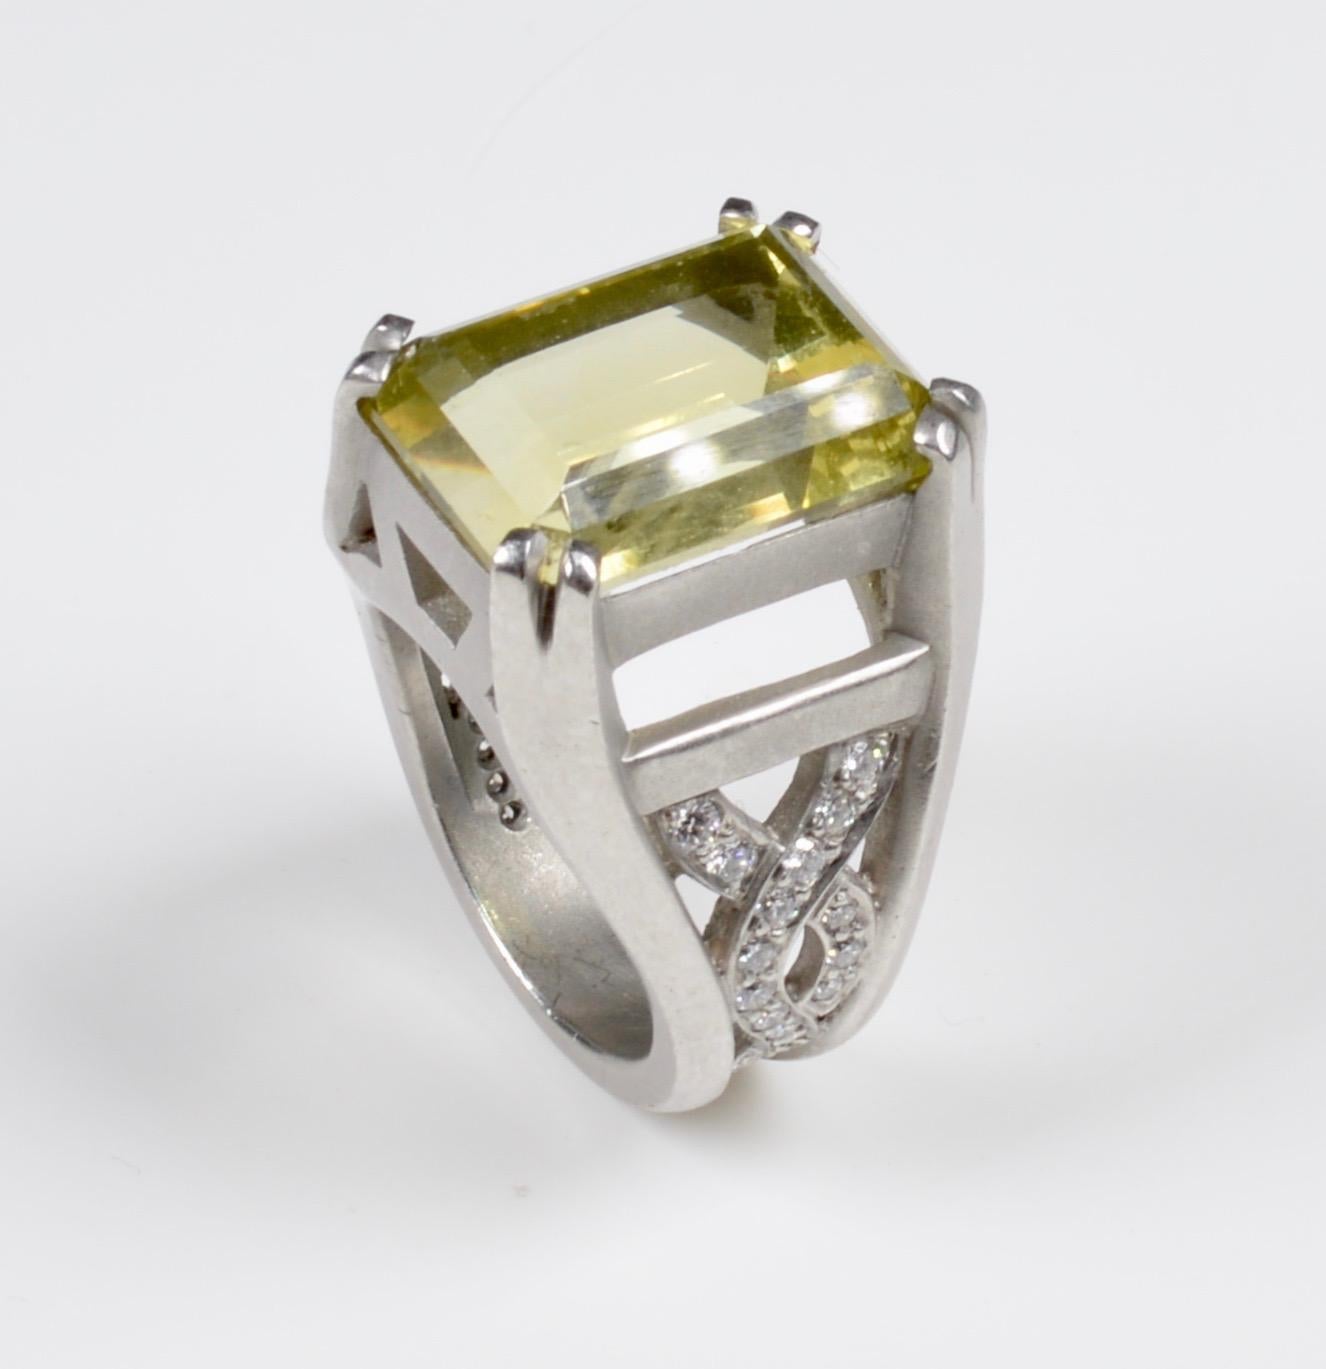 A platinum, beryl and diamond ring by renowed New York jewellers Kieselstein-Cord, circa 1998. 
This stunning ring contains one octagonal step cut yellowish green beryl weighing approximately 11.79 carats and 42 round brilliant cut diamonds weighing